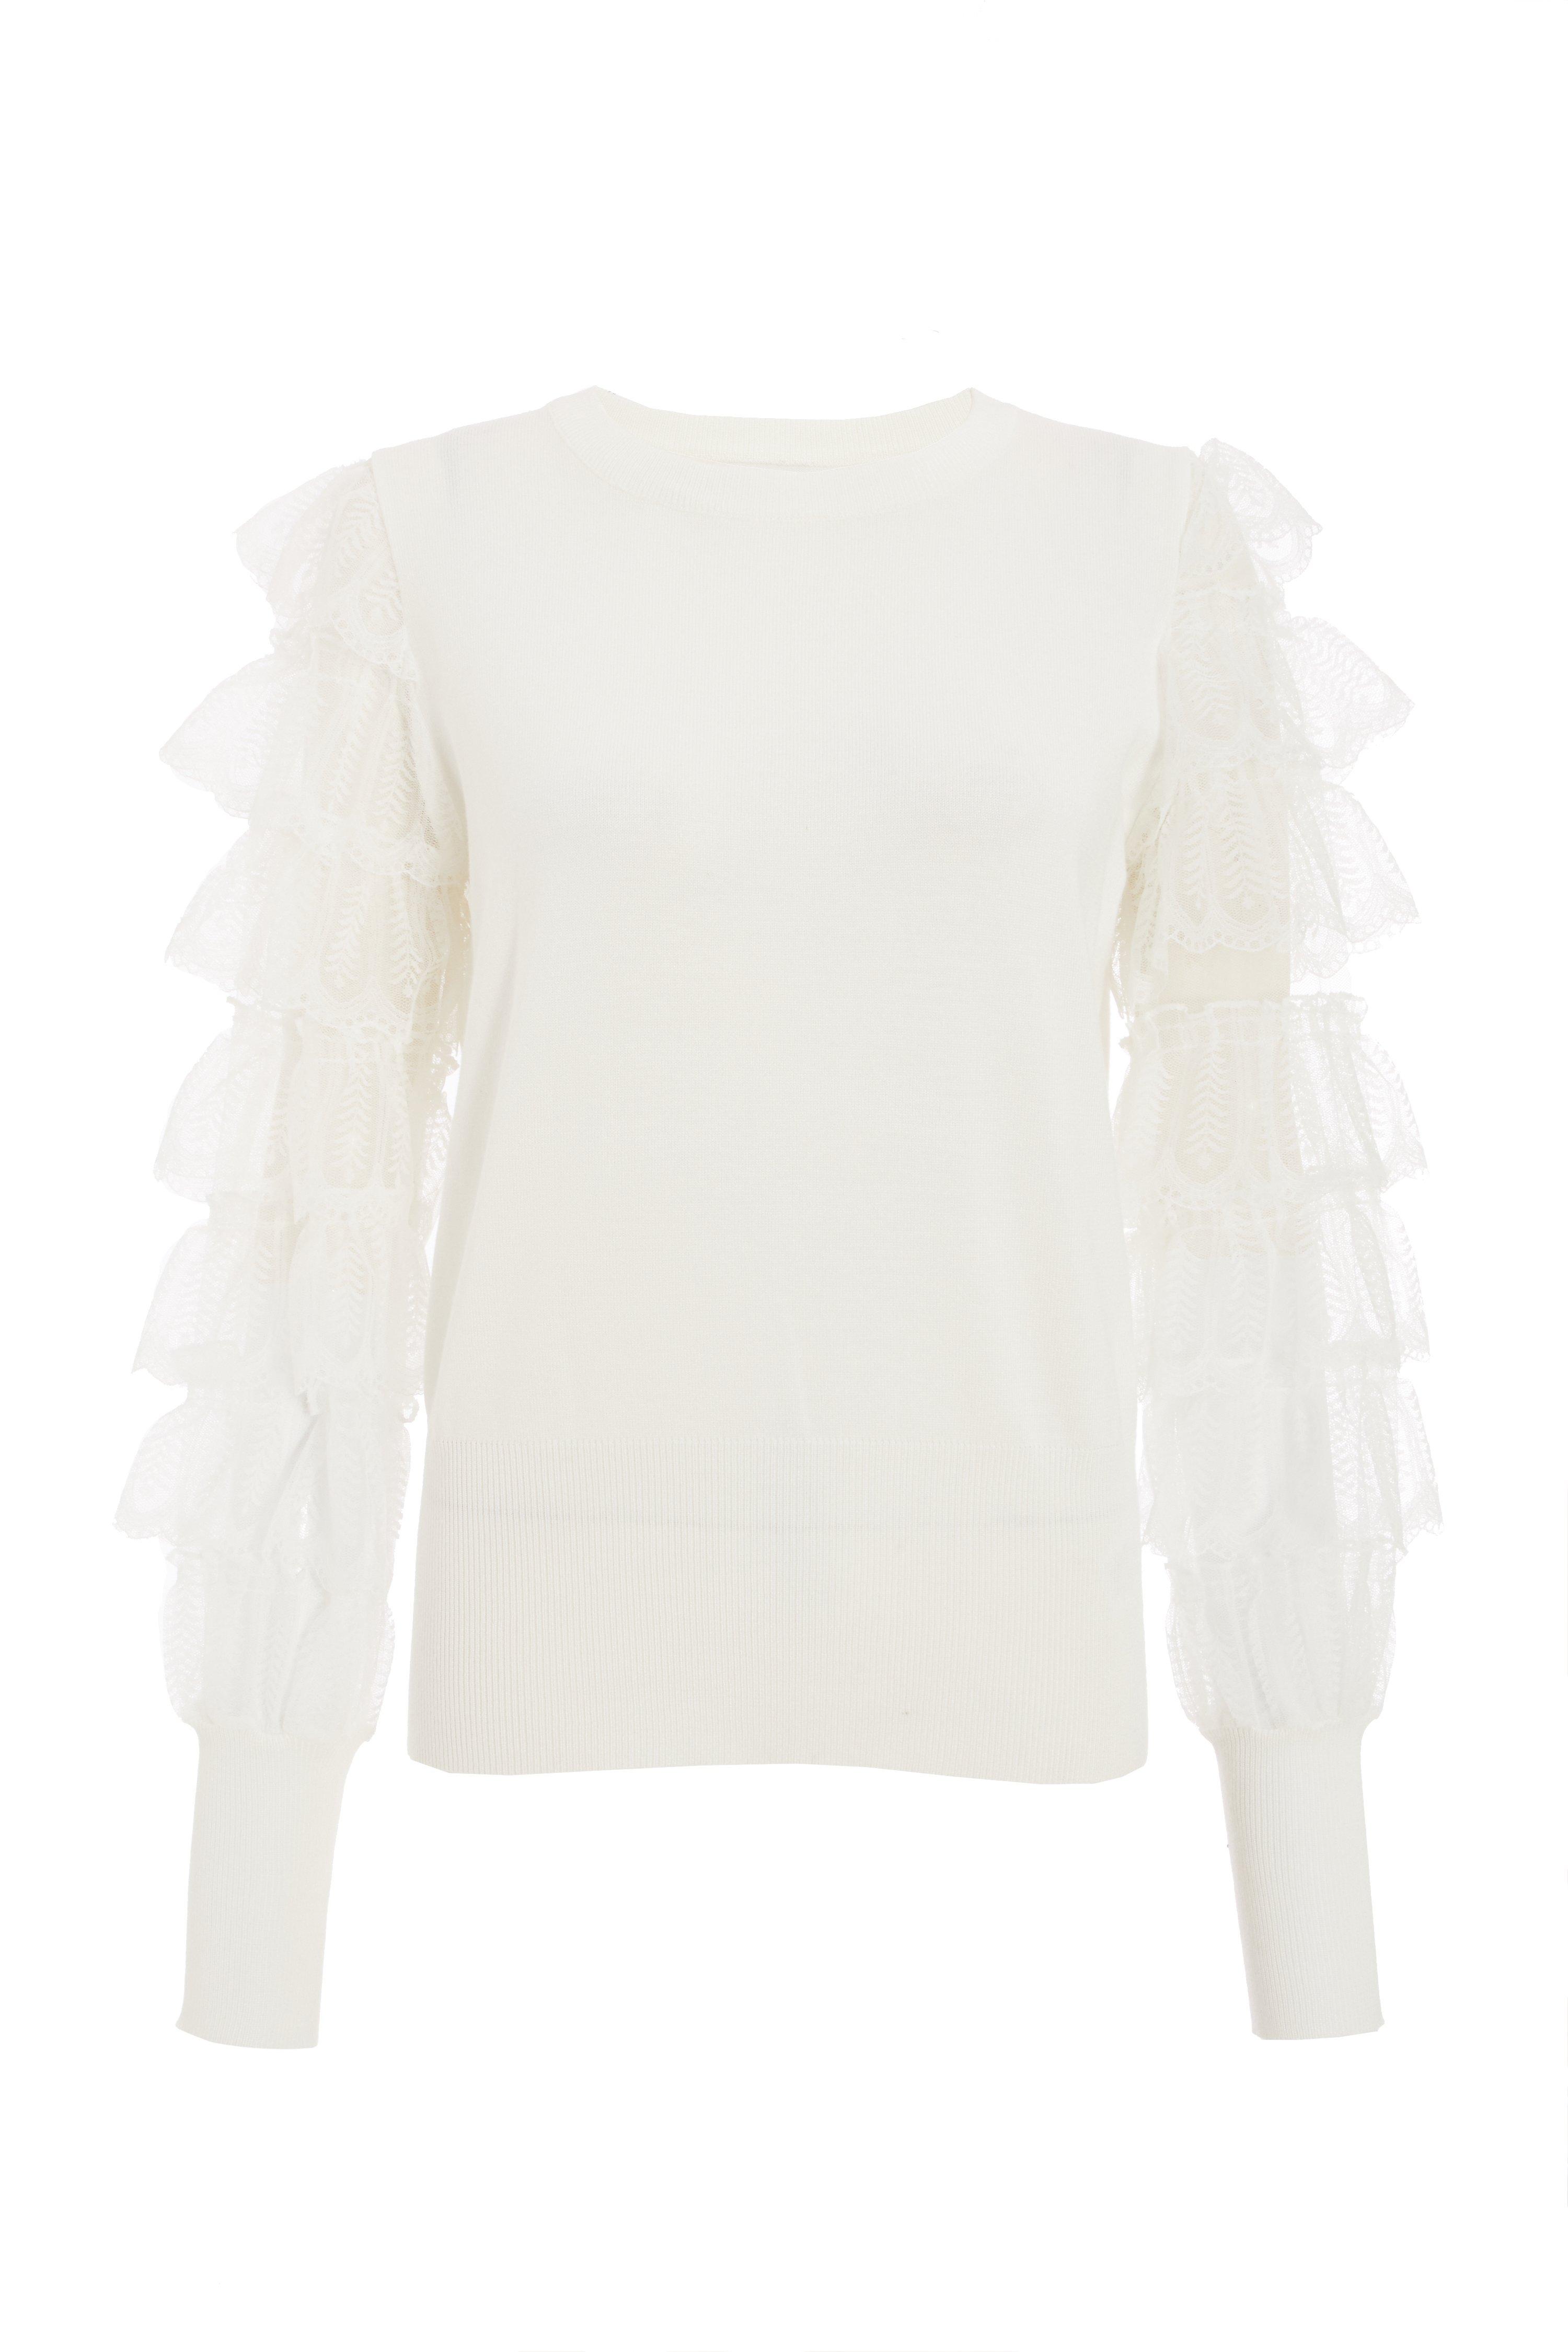 Cream Knitted Lace Sleeve Jumper - Quiz Clothing